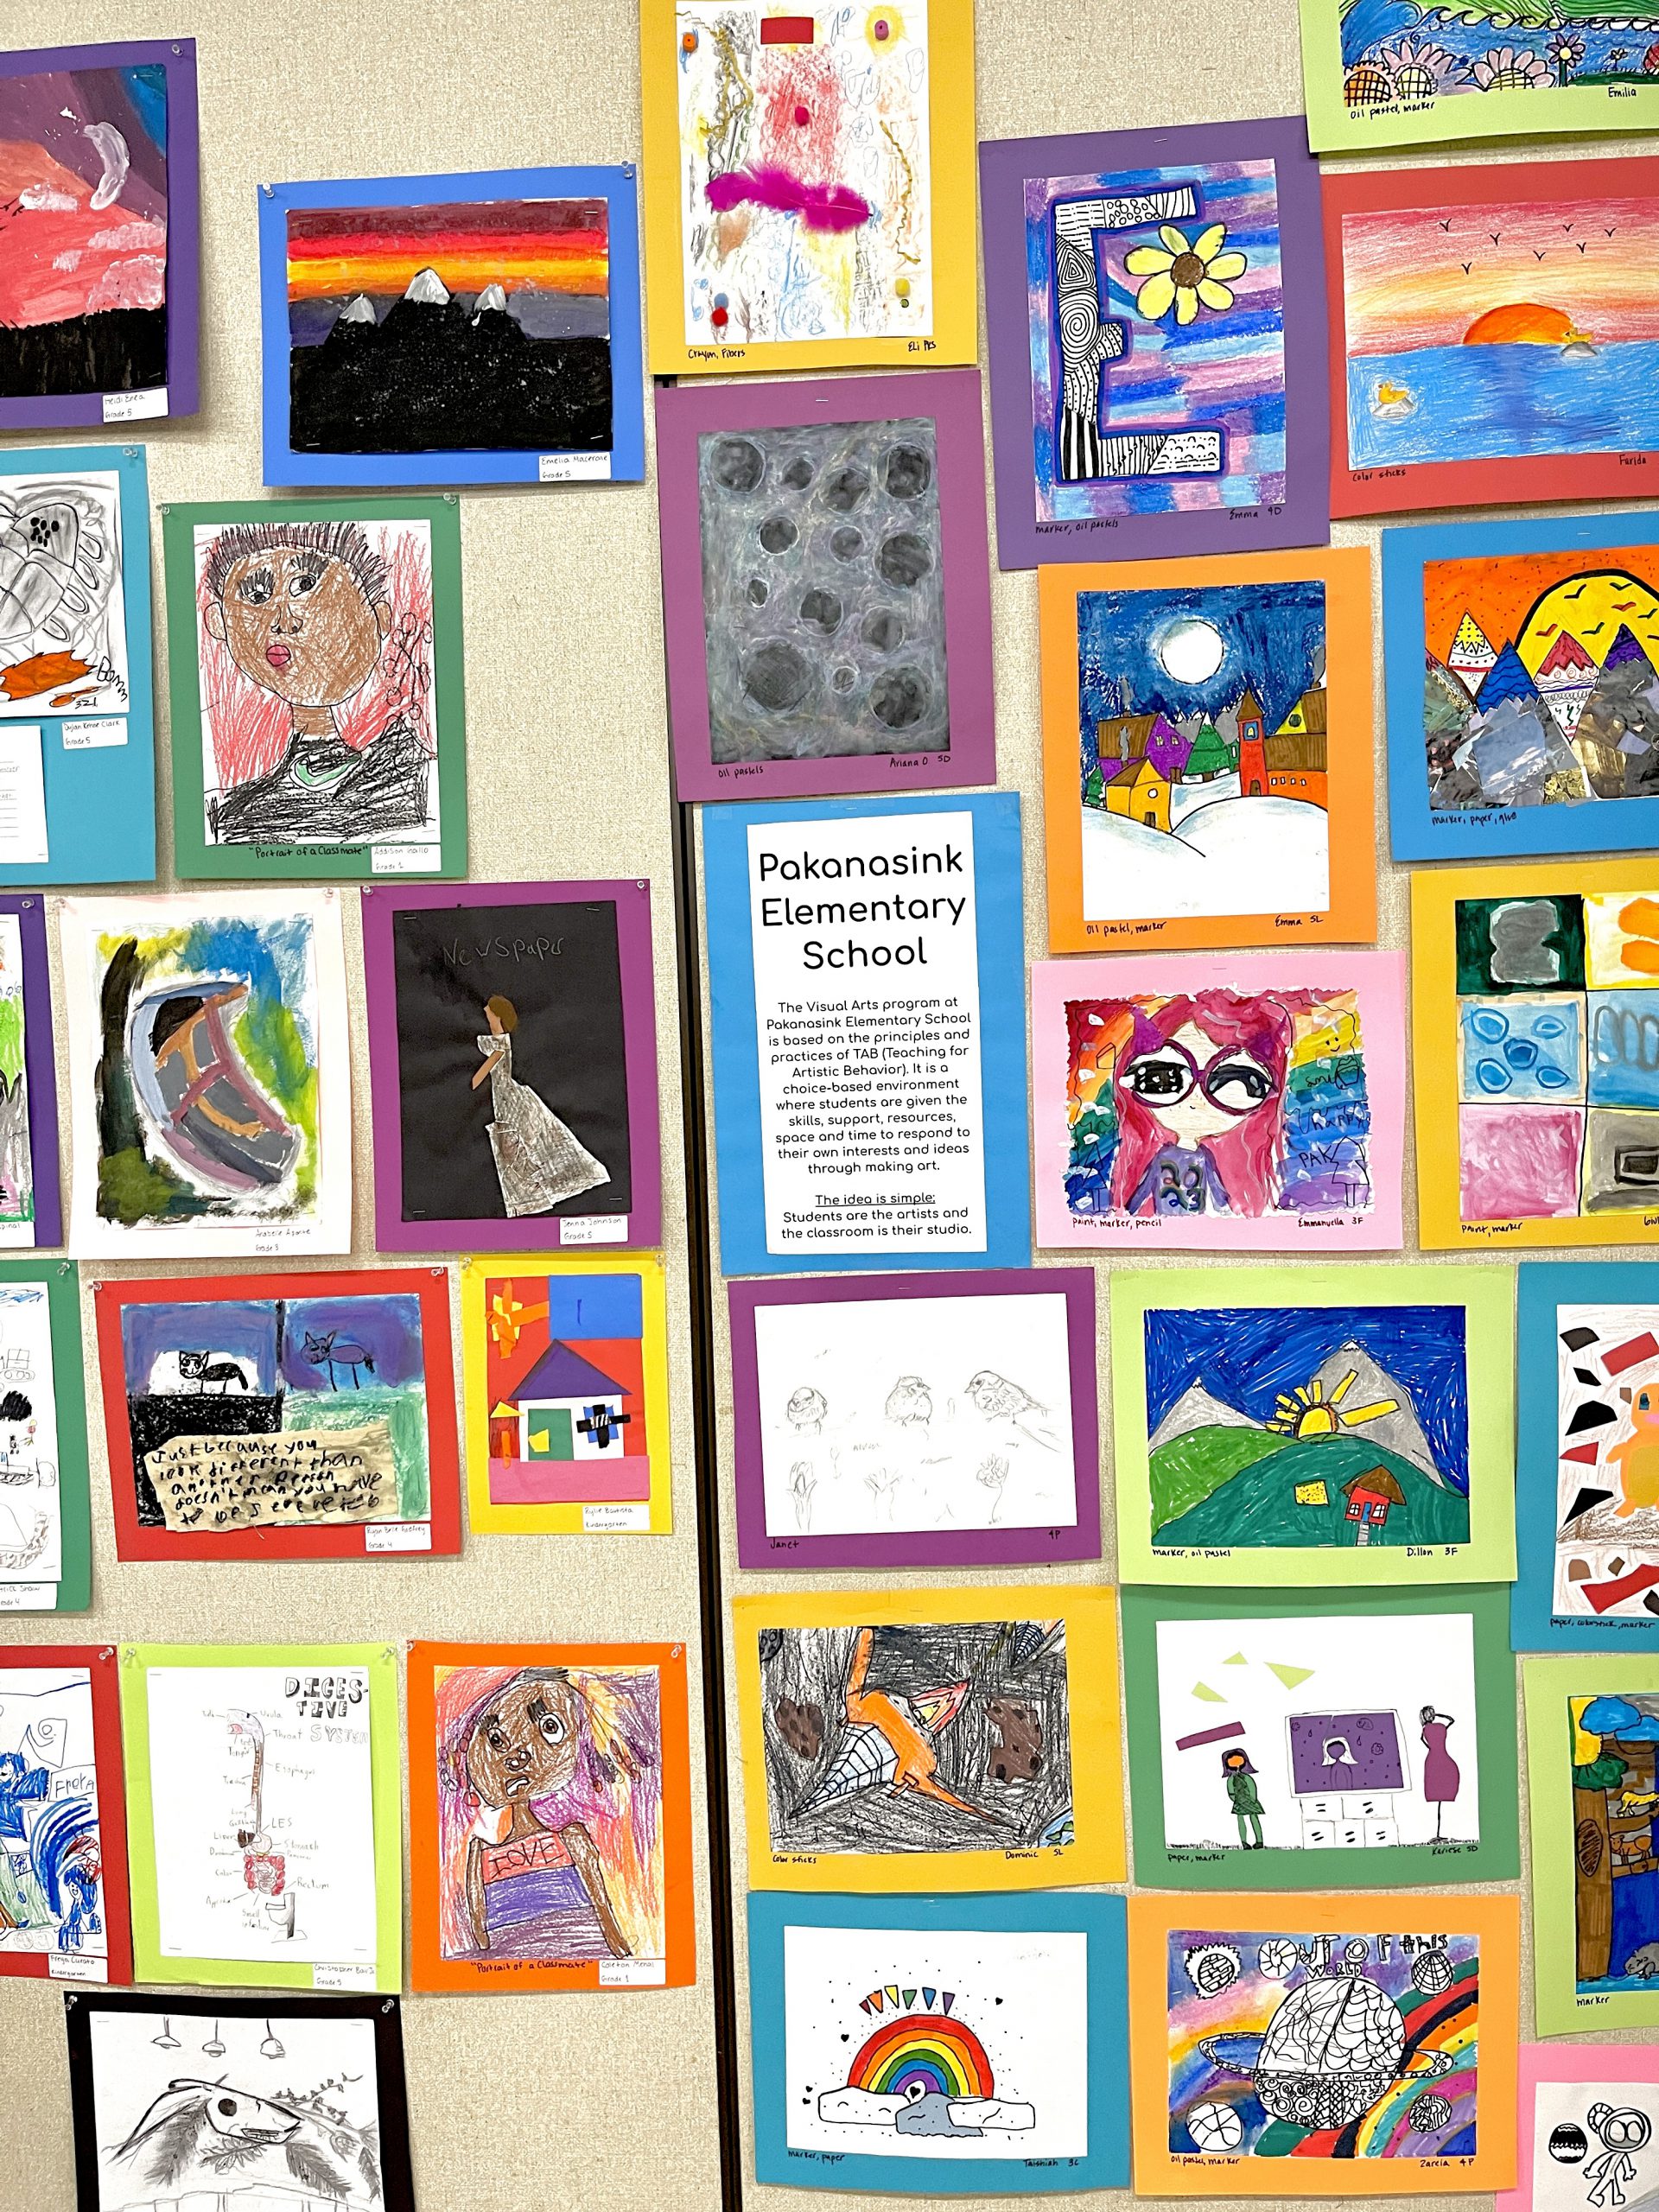 A full wall filled with artwork by elementary students.